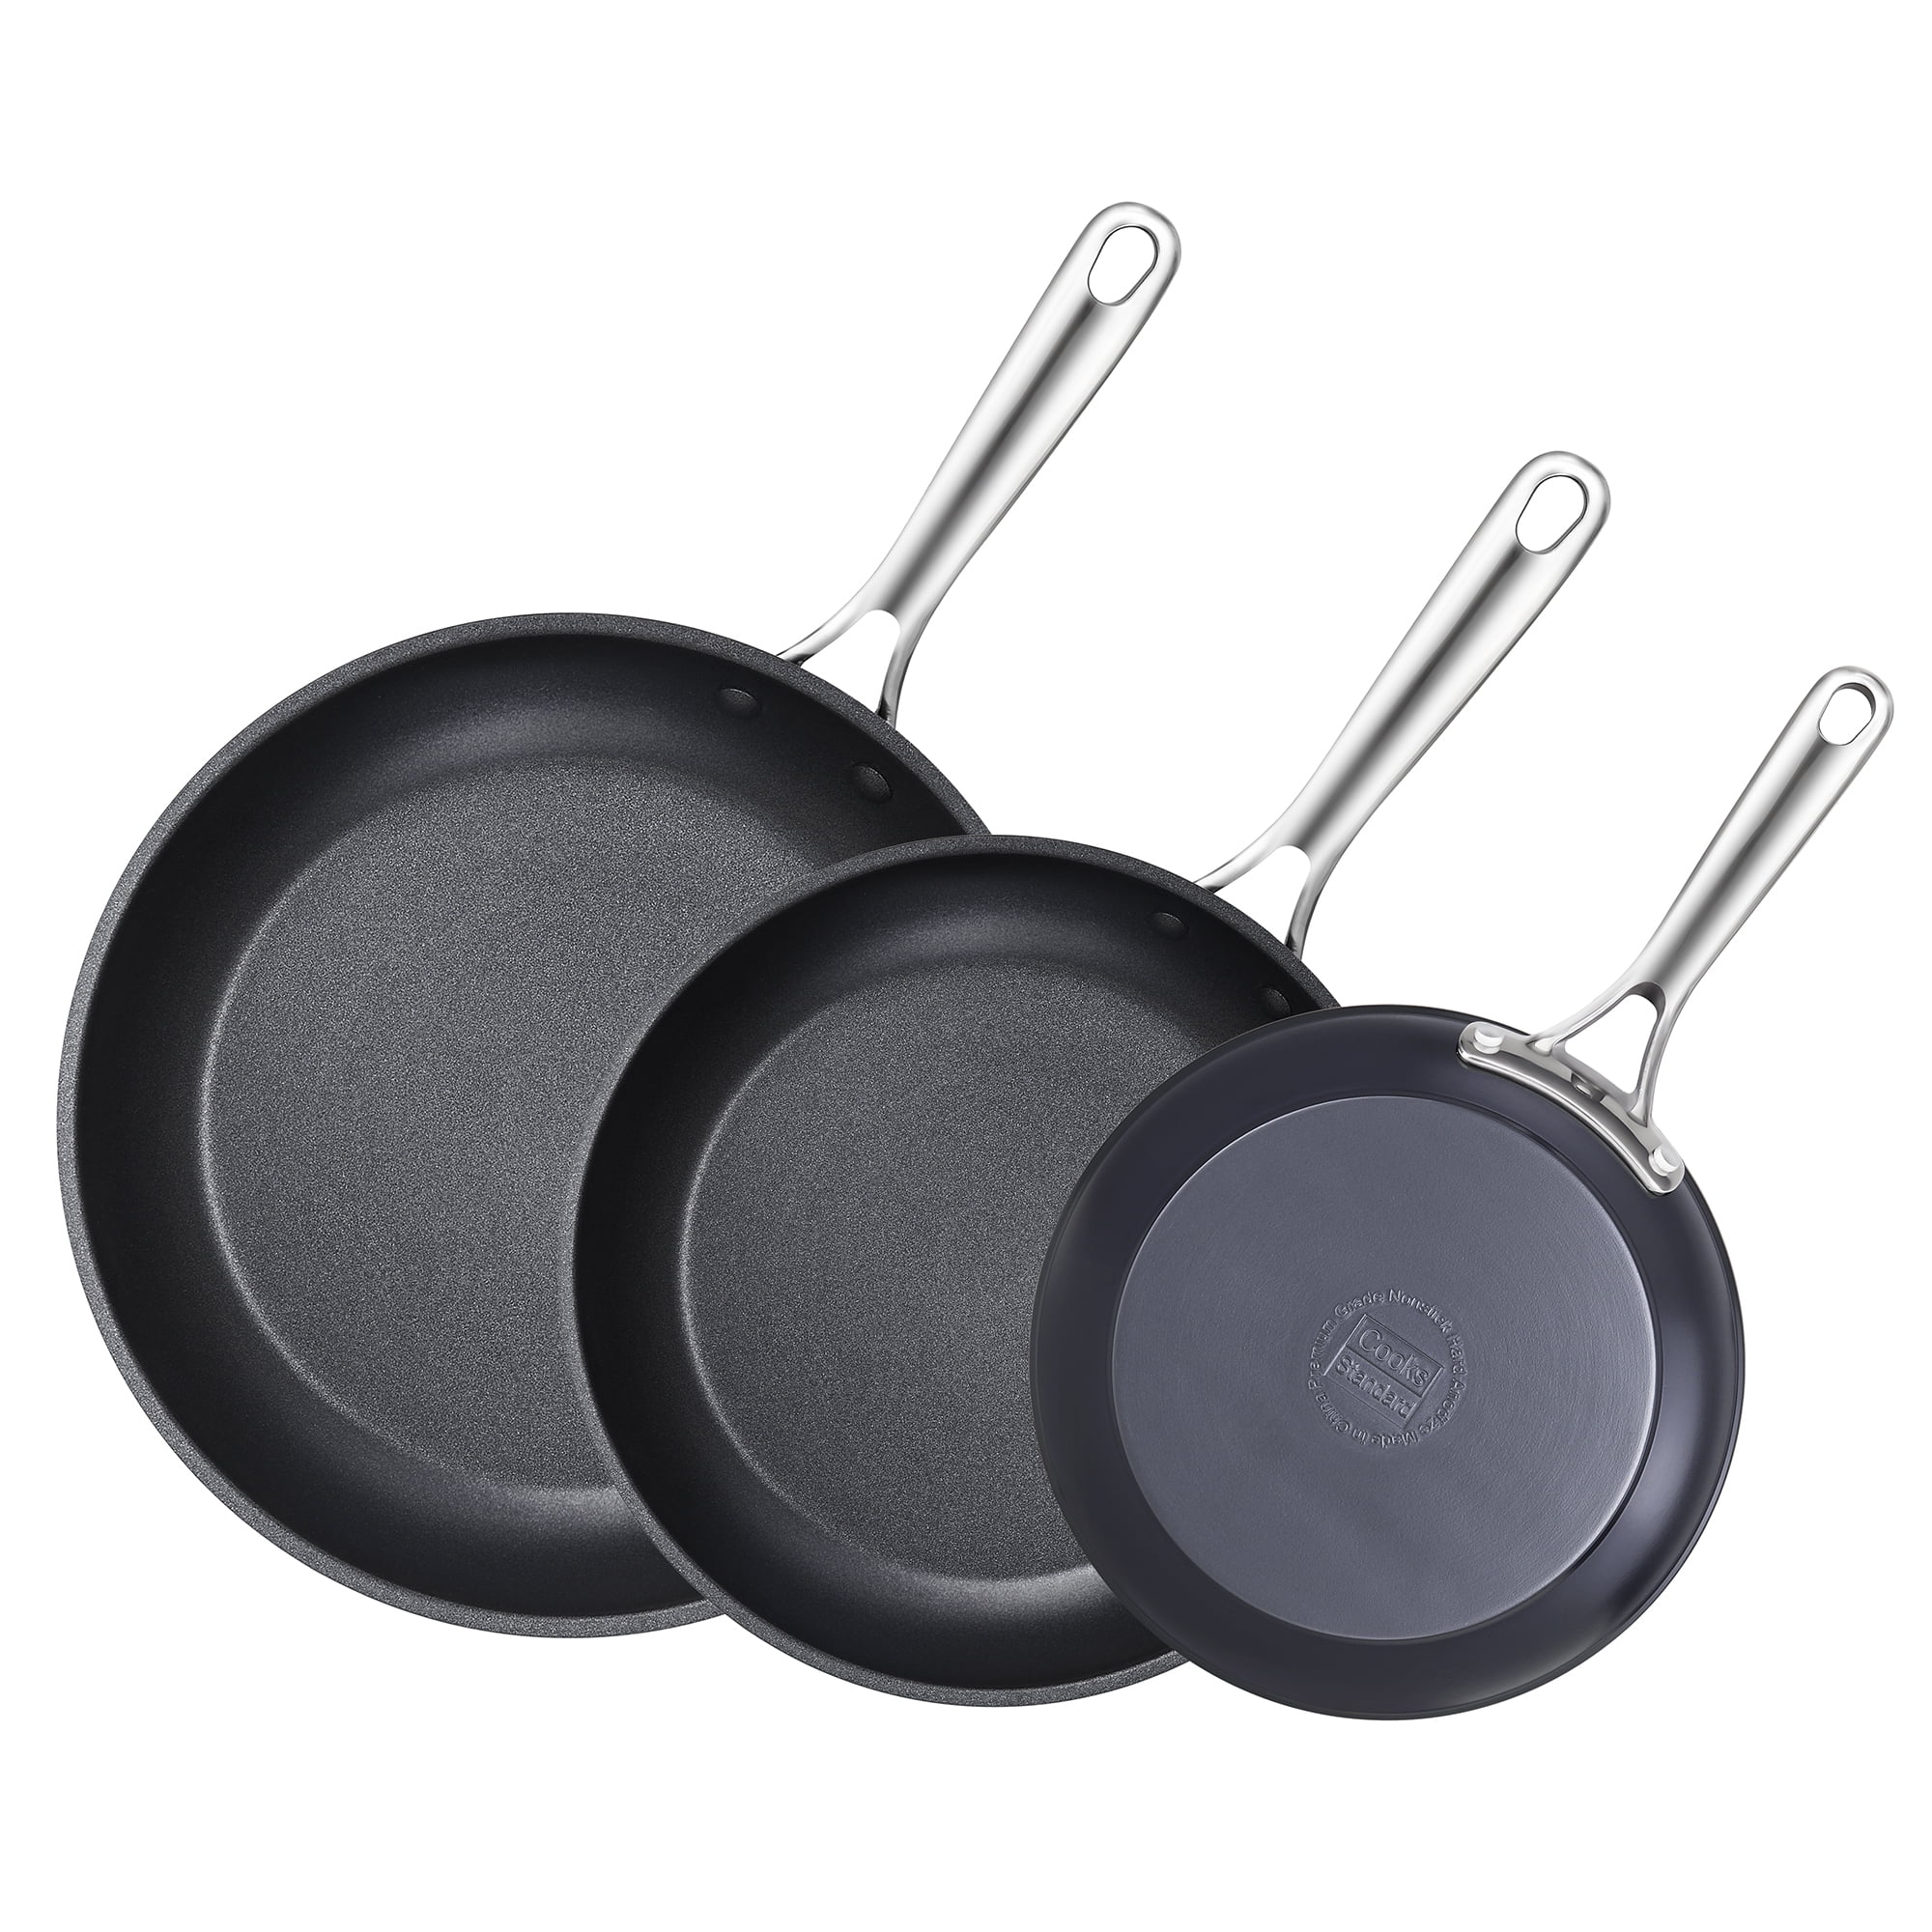 Cooks Standard 02637 Nonstick Hard Anodized 9.5-Inch 24cm Crepe Griddle Pan, Black